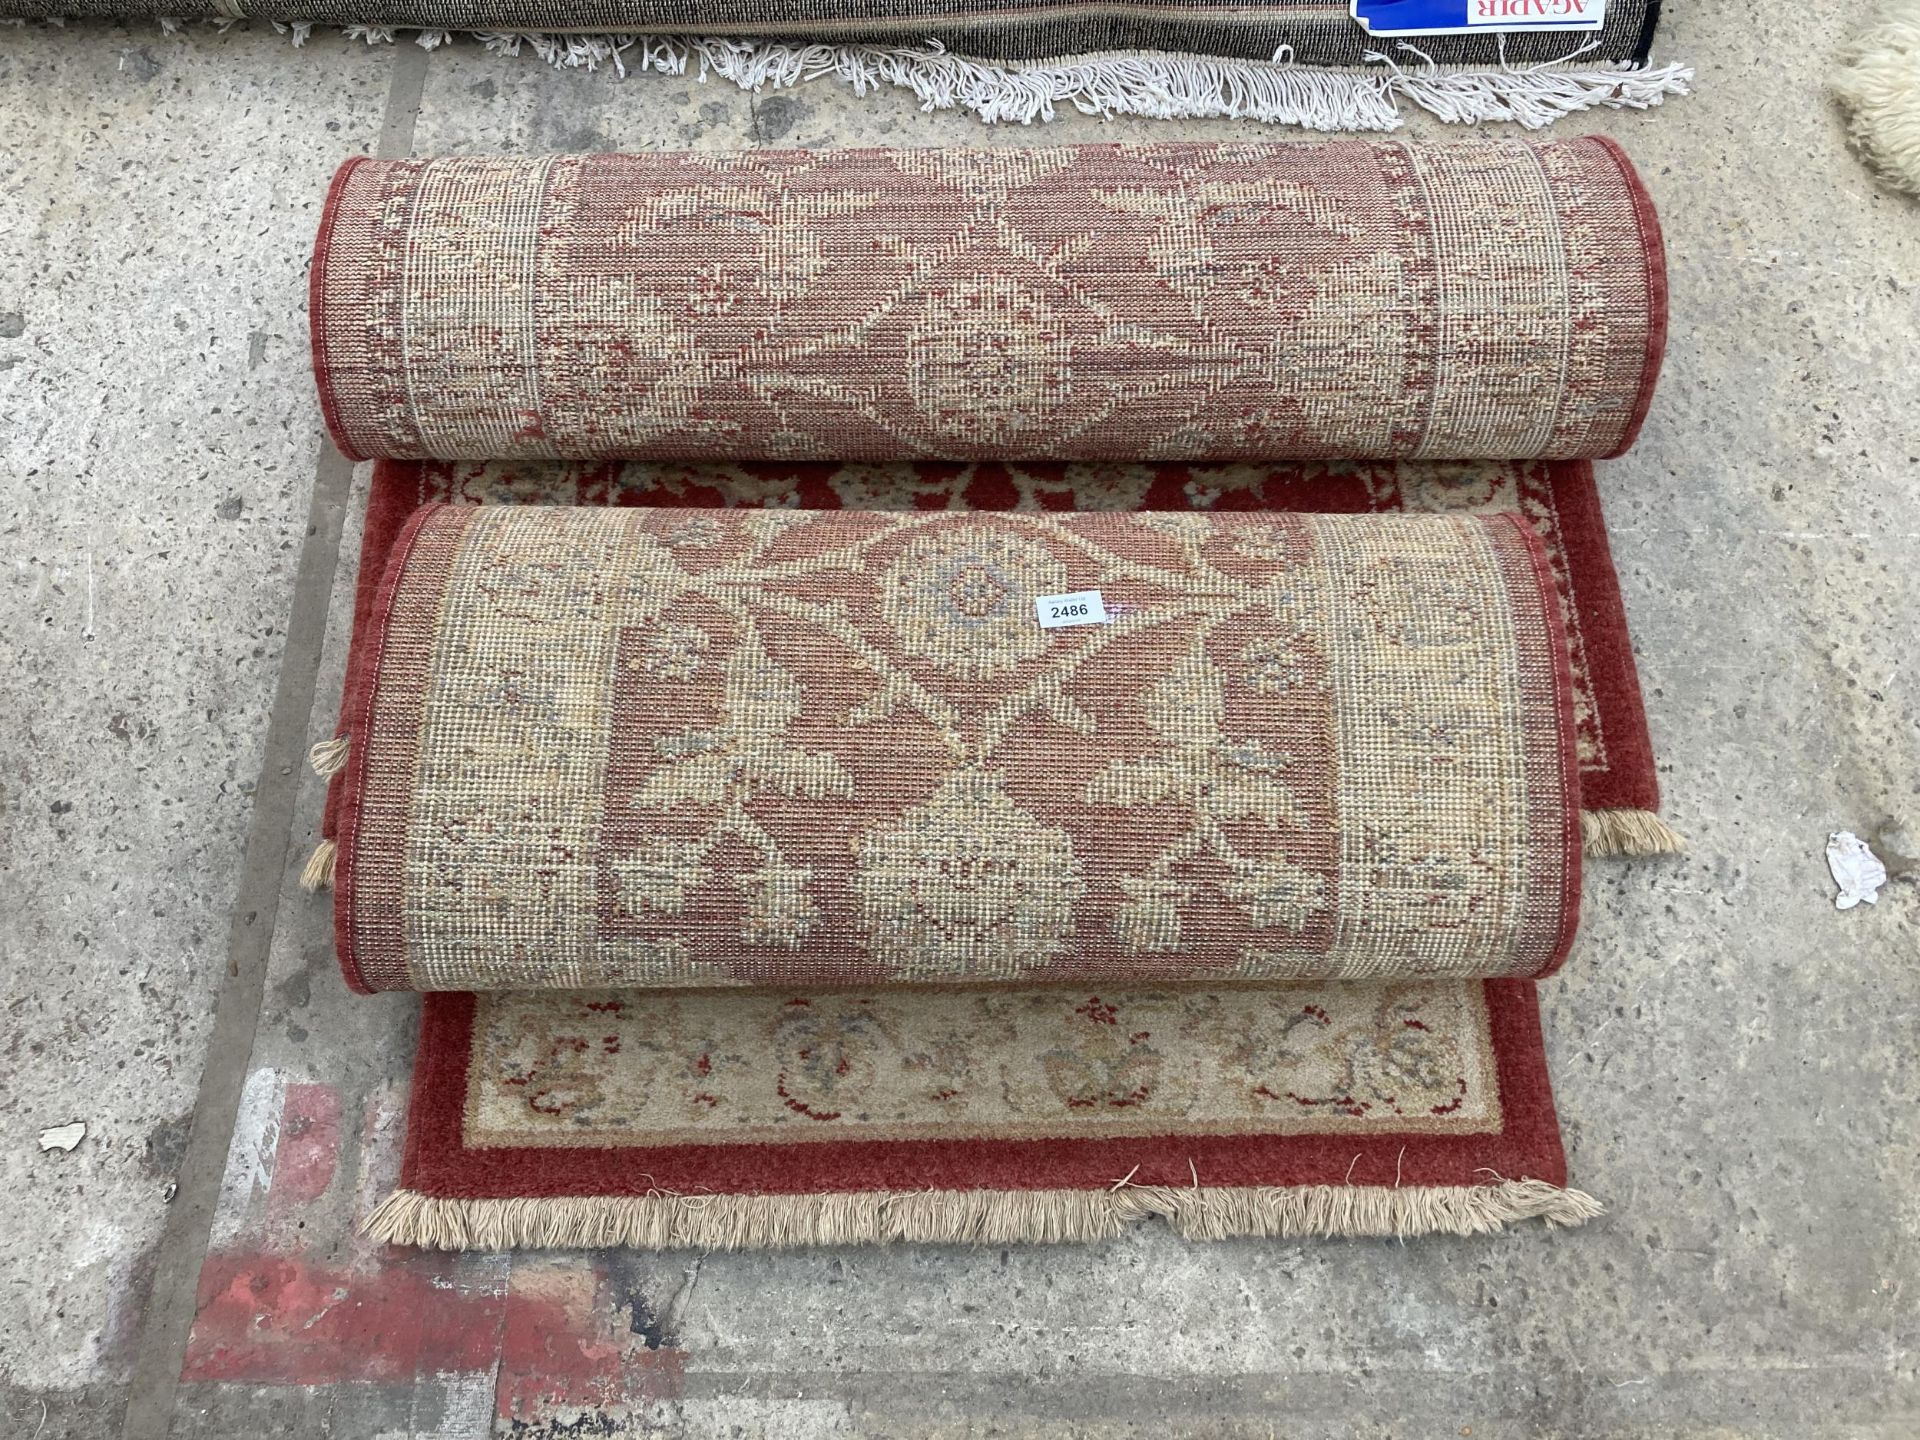 TWO SMALL RED PATTERNED FRINGED RUGS